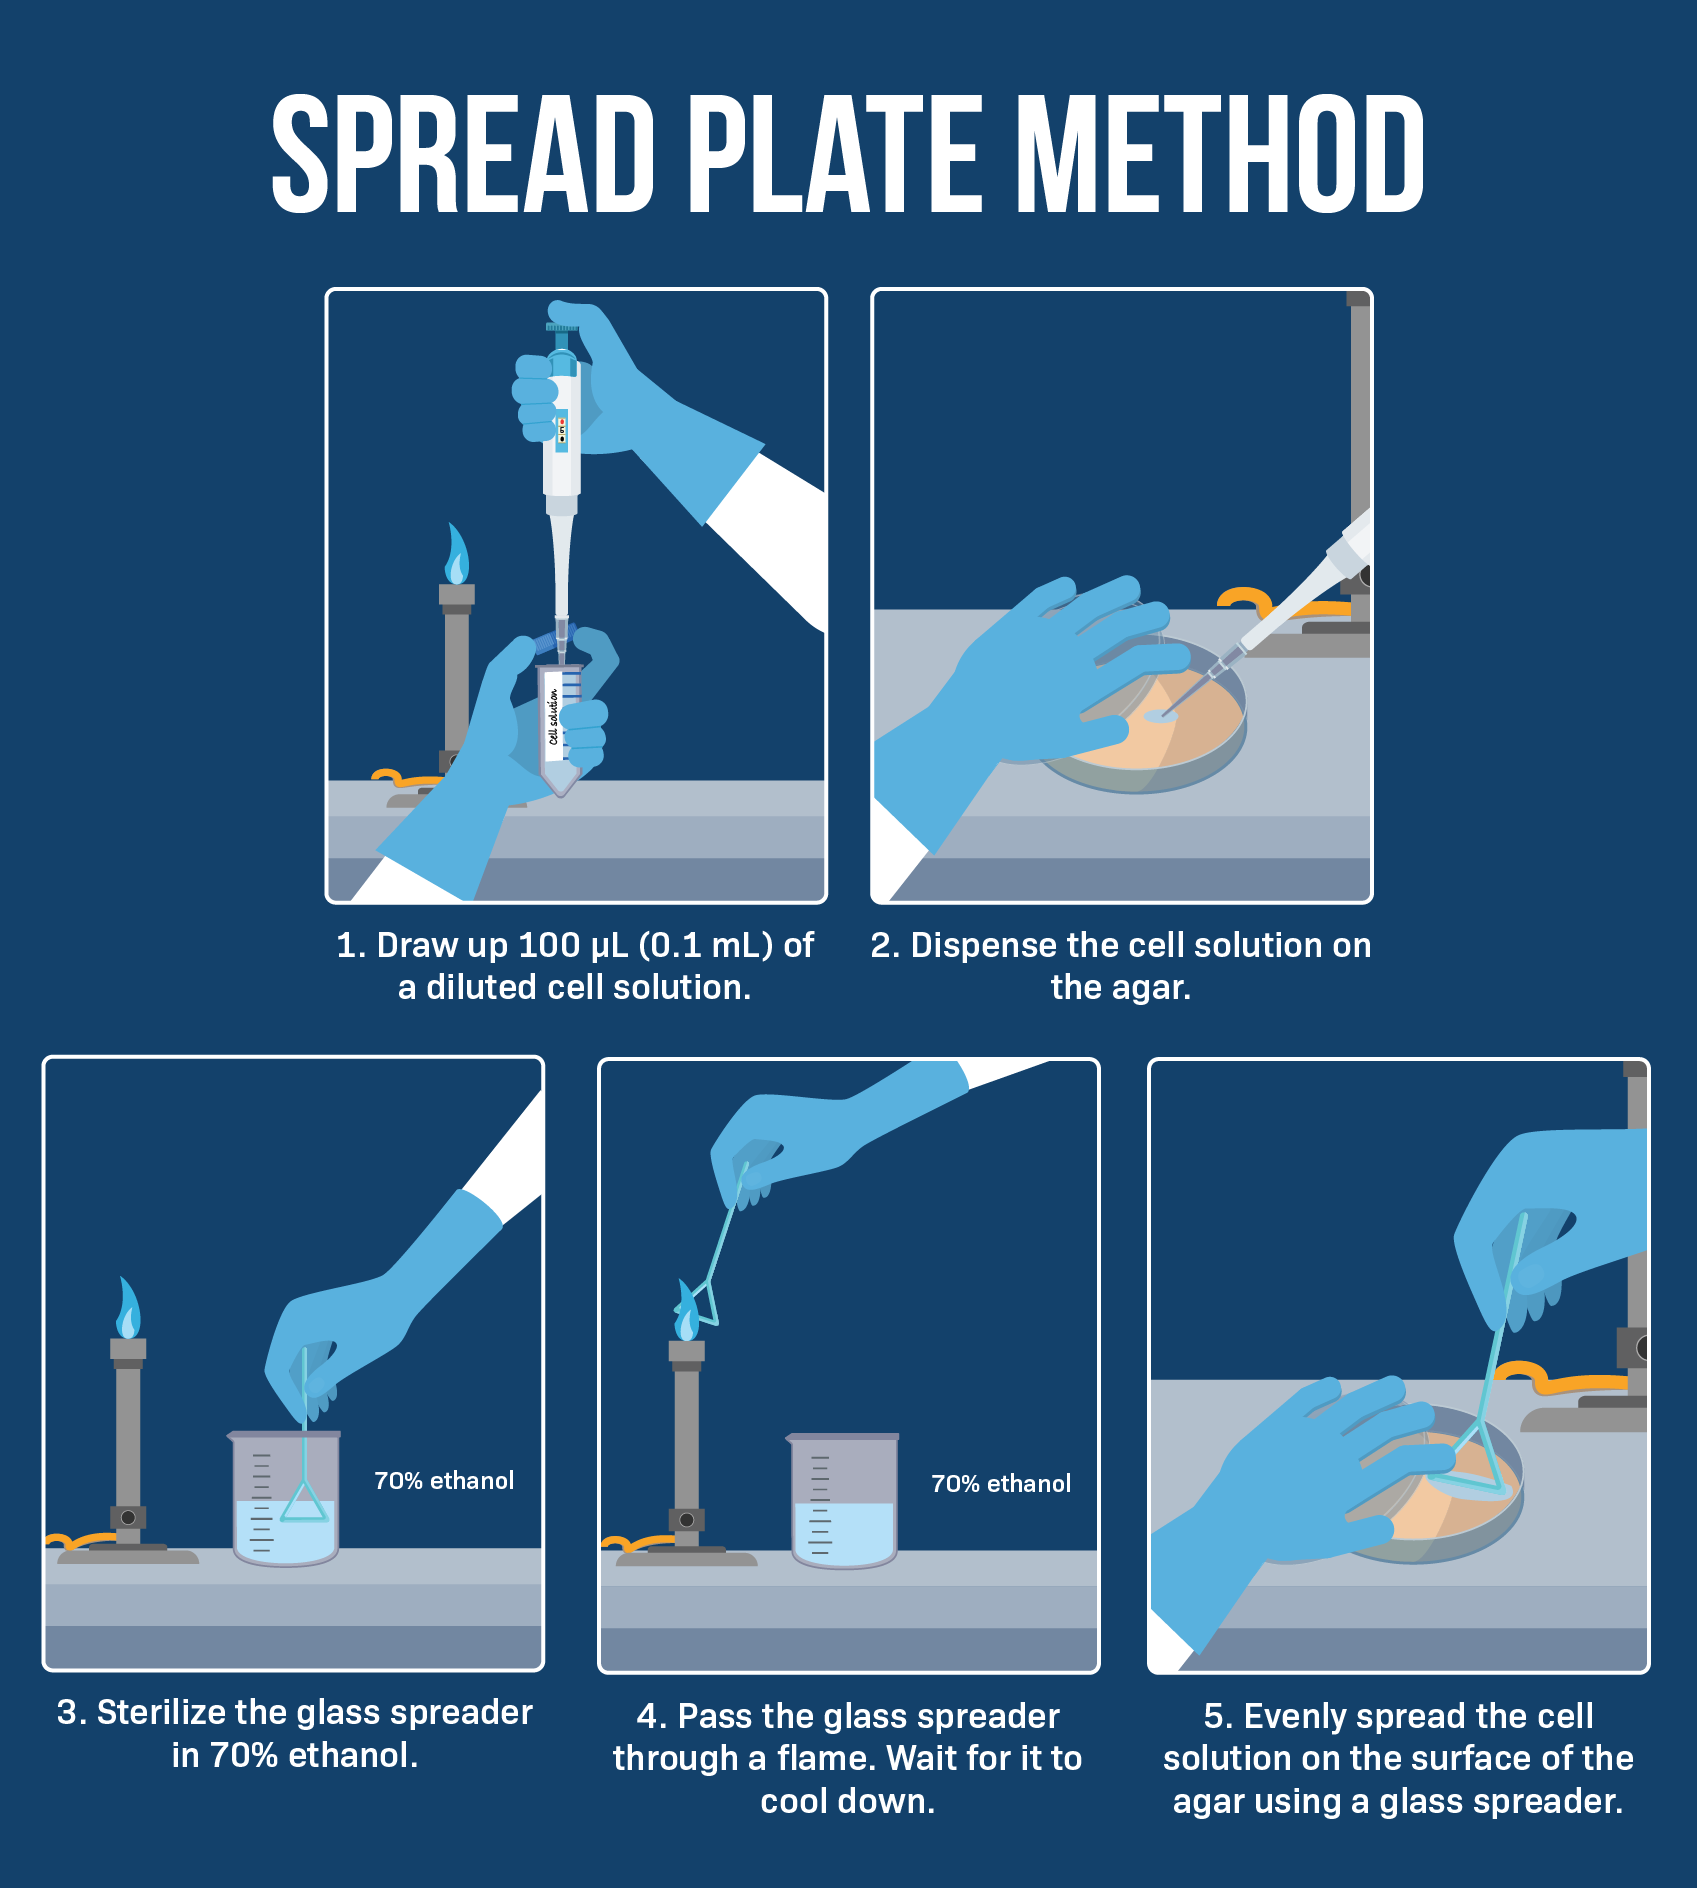 what is the purpose of the spread plate technique